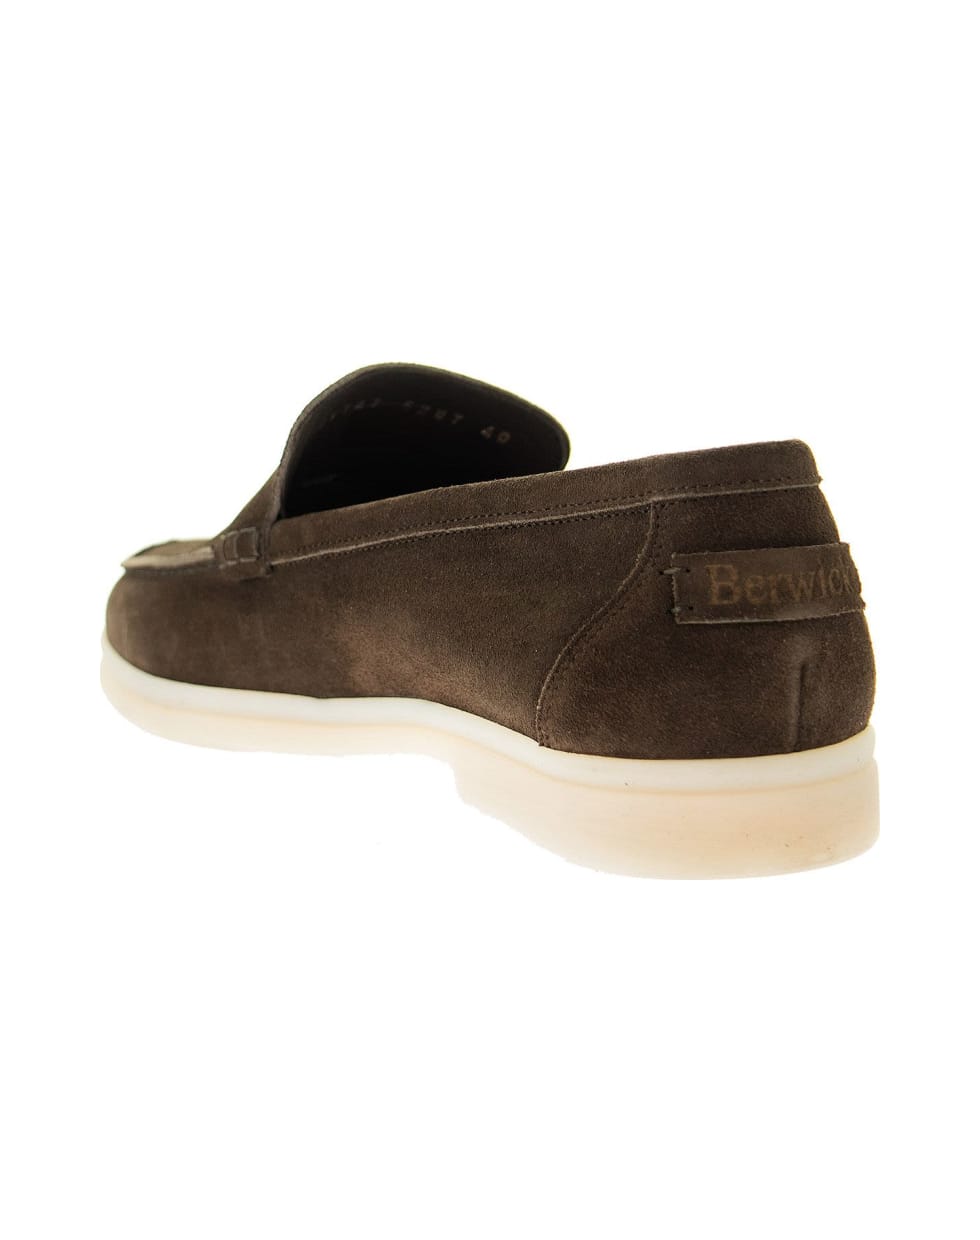 Berwick 1707 Suede Loafer - Brown